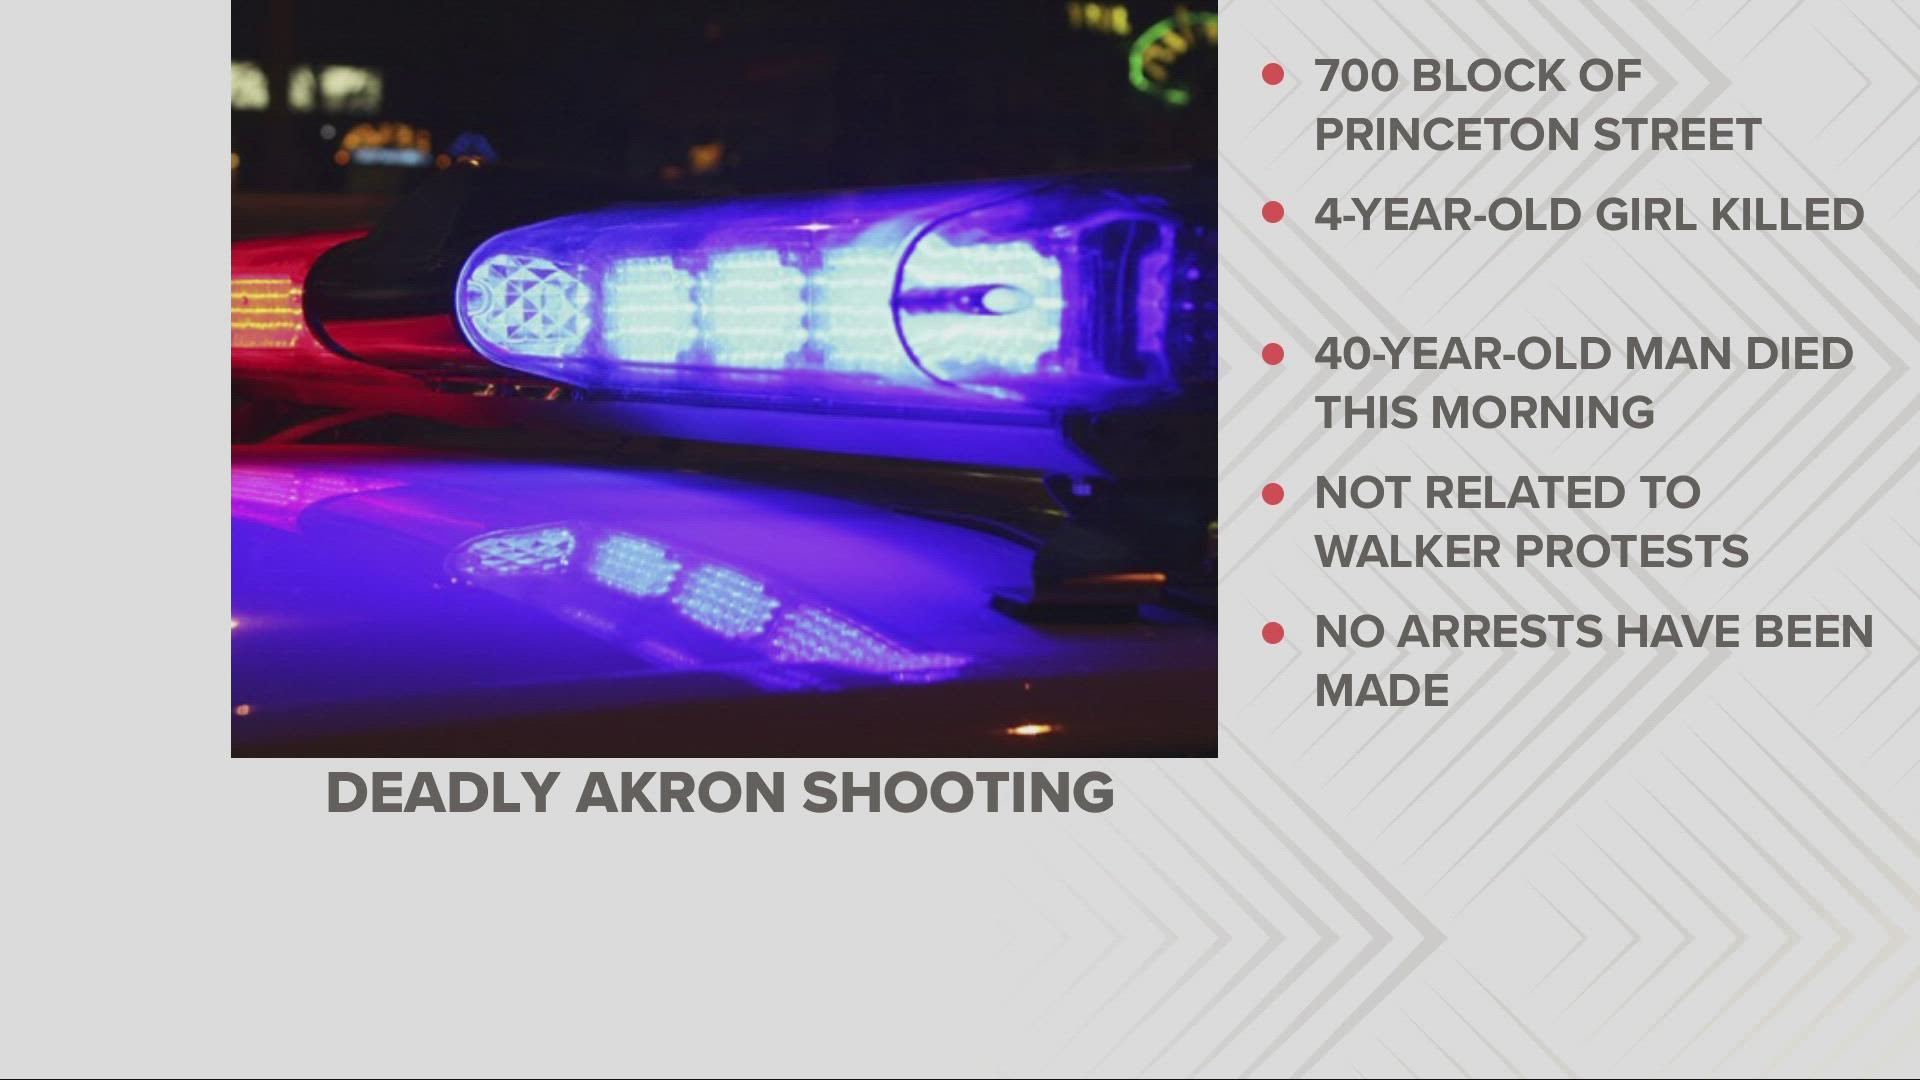 3News' Kierra Cotton gives an update after officials confirm a 40-year-old man also died in an Akron shooting on Friday night.